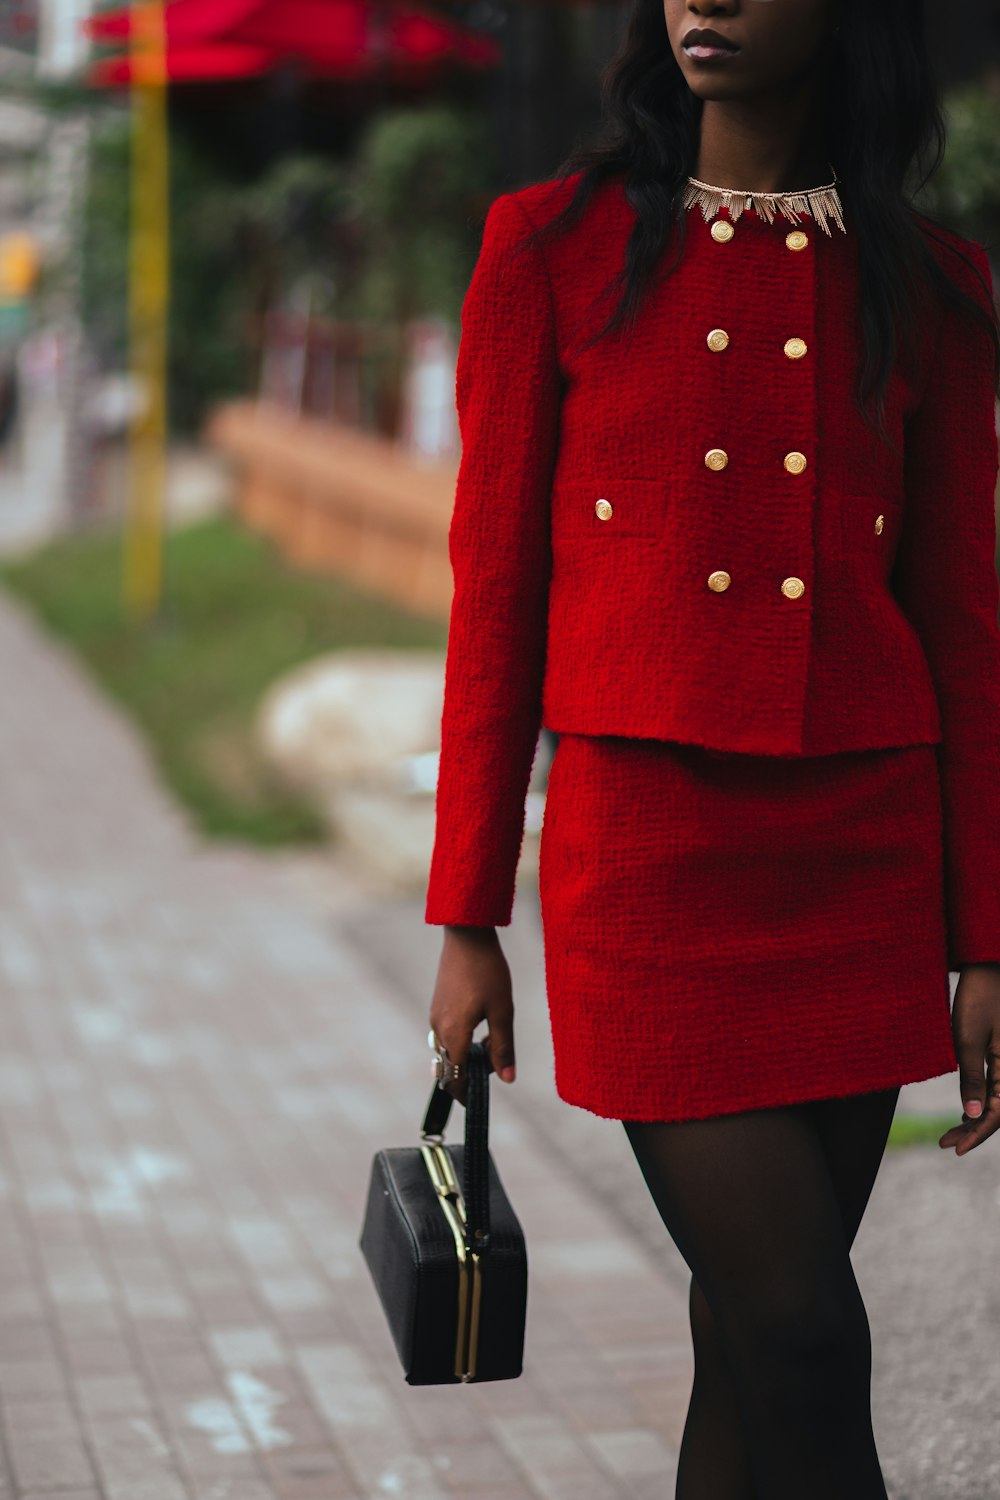 a woman in a red jacket and skirt walking down the street